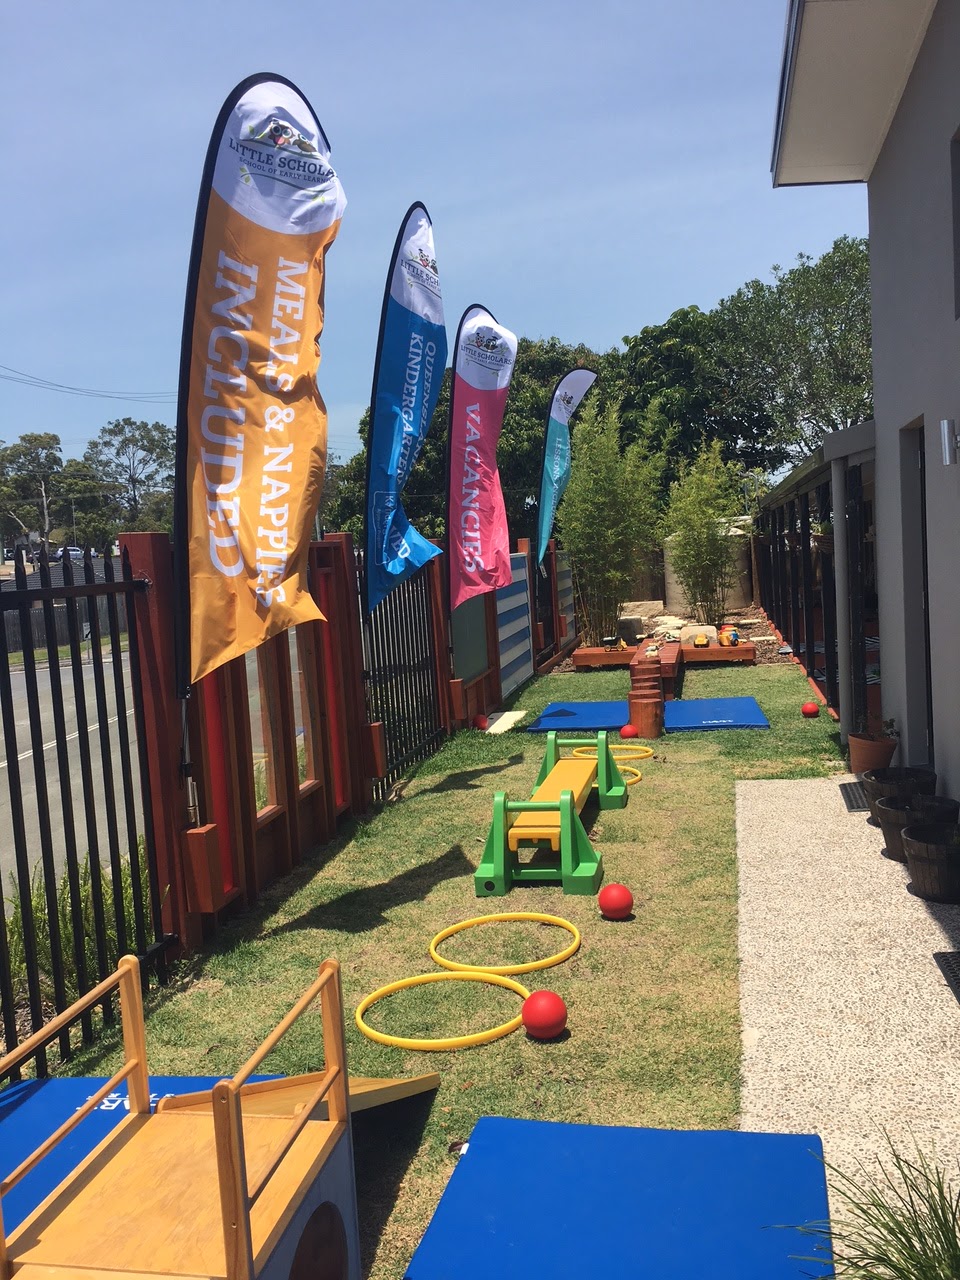 Little Scholars School Of Early Learning Ashmore | Sturt Street &, Windsor Place, Ashmore, Queensland 4214 | +61 7 5597 2605